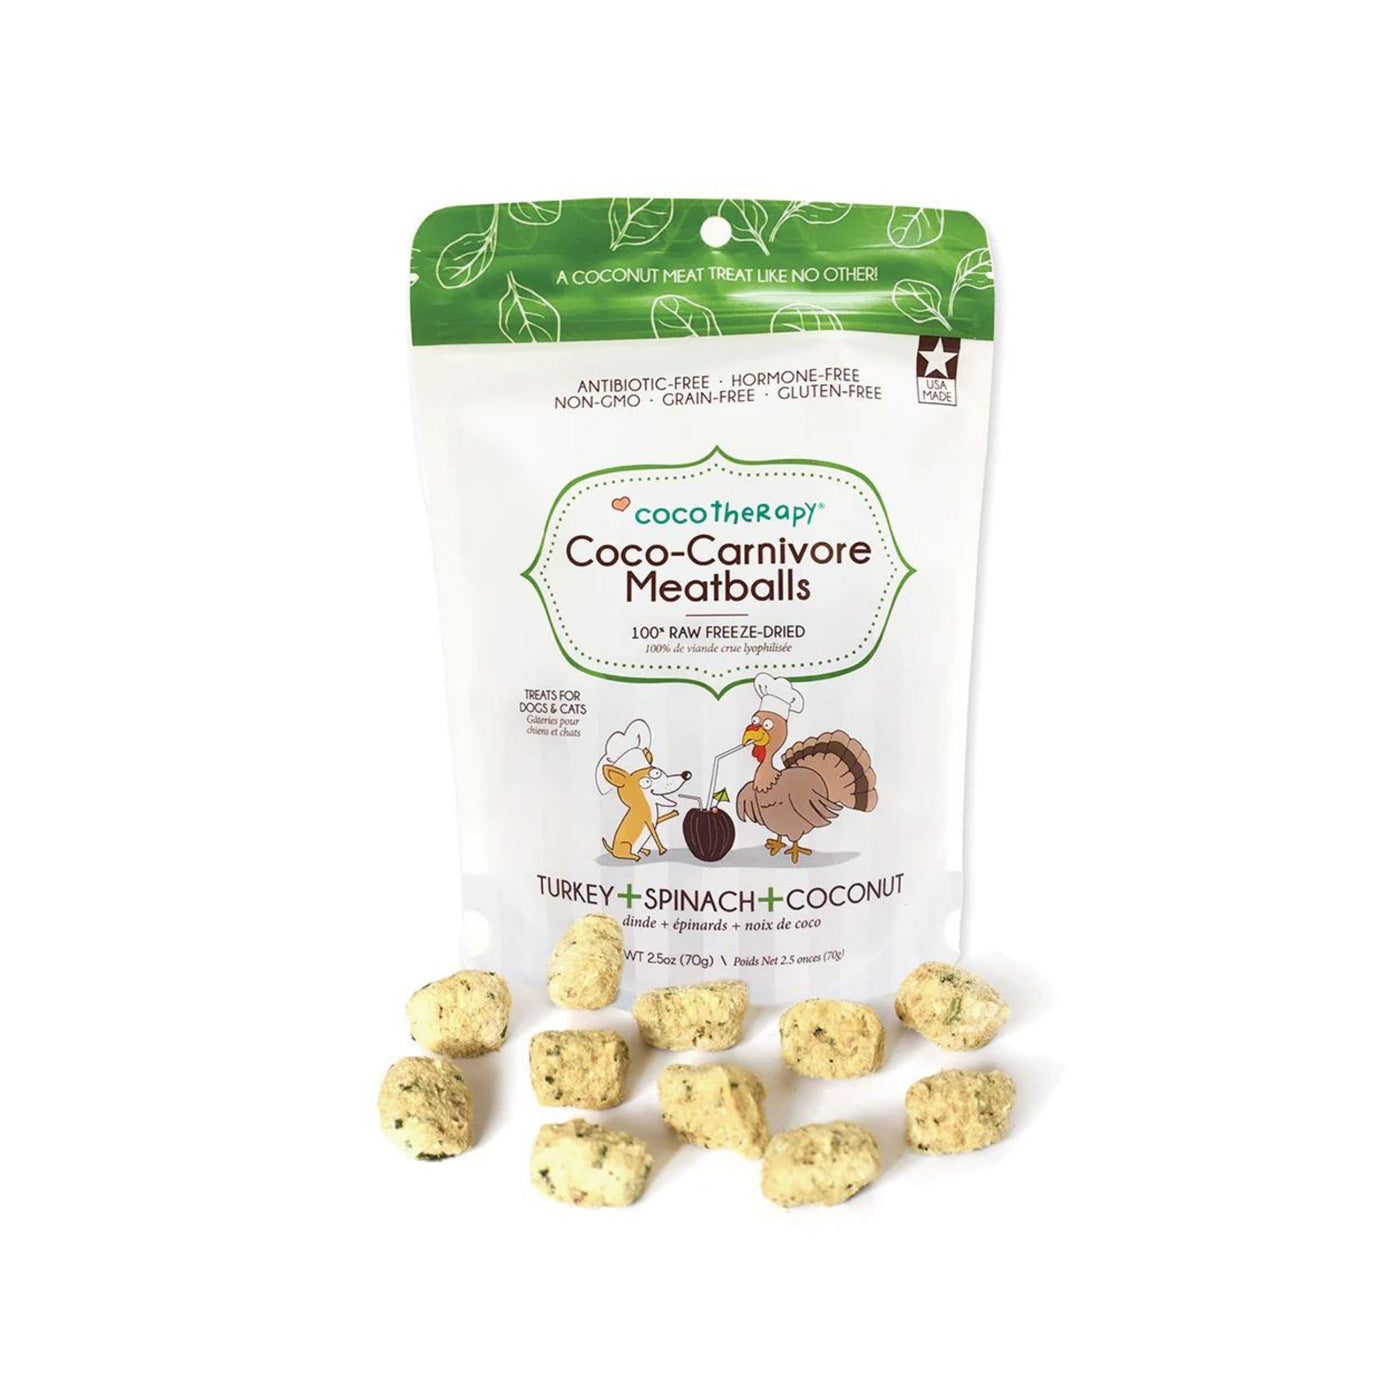 Coco Carnivore Meatballs - Turkey, Spinach, Coconut Treats for Dogs and Cats